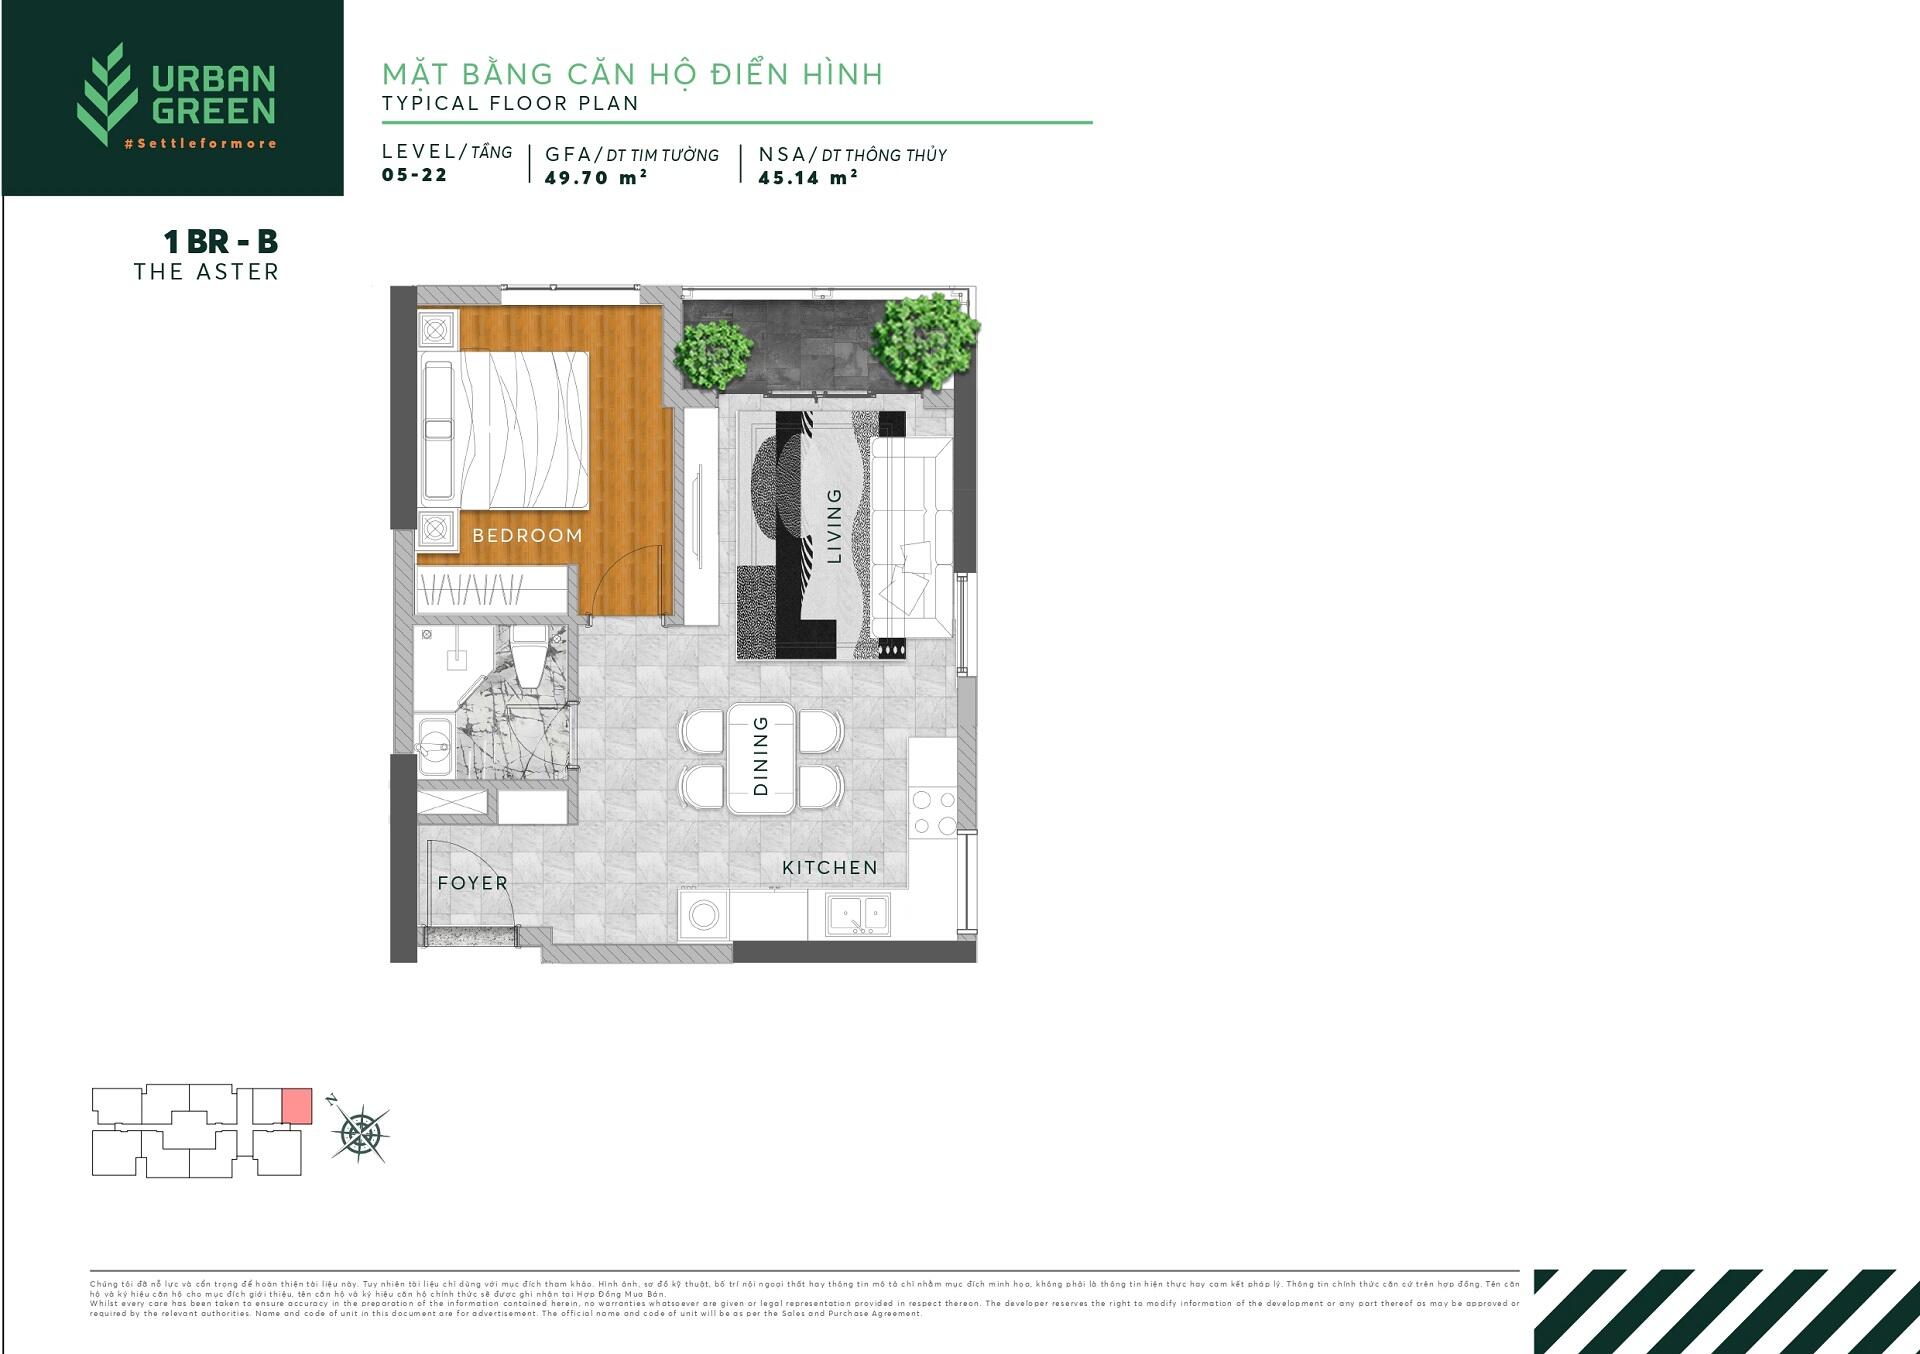 The layout of The Aster apartment 1 bedroom 1BR - B